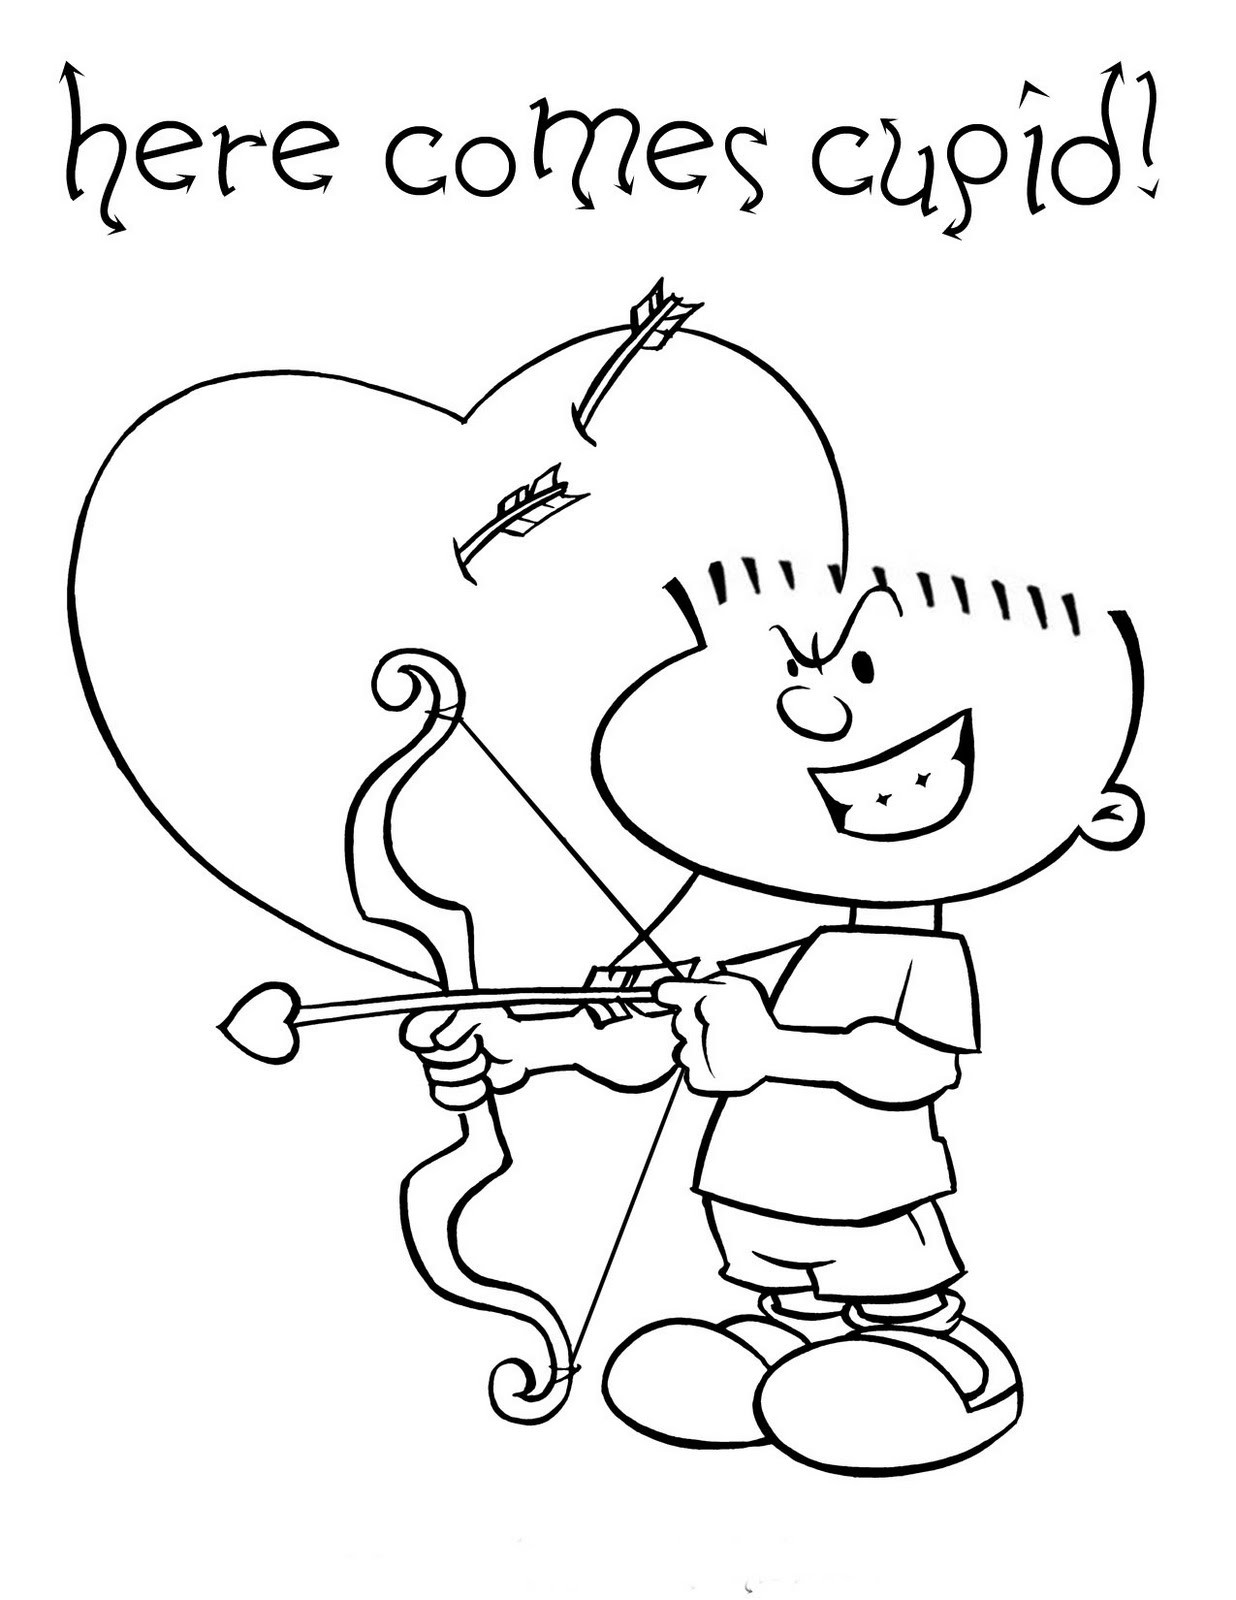 Valentines Day Coloring Pages Printable
 Valentines Day Coloring Pages